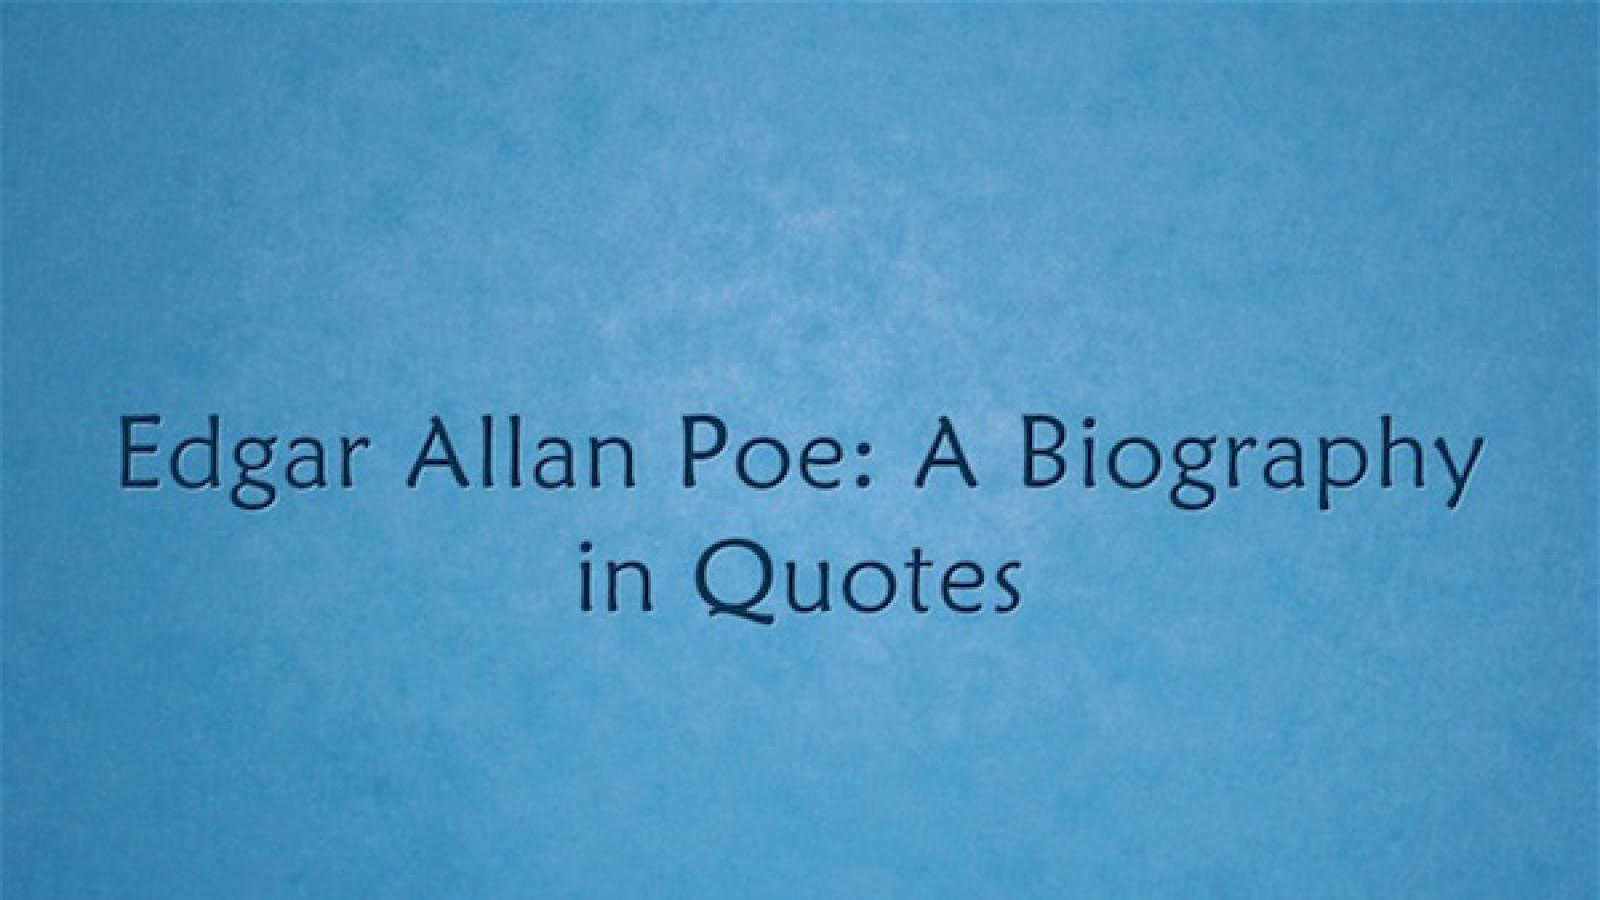 Edgar Allan Poe a biography in quotes in black text on a blue background